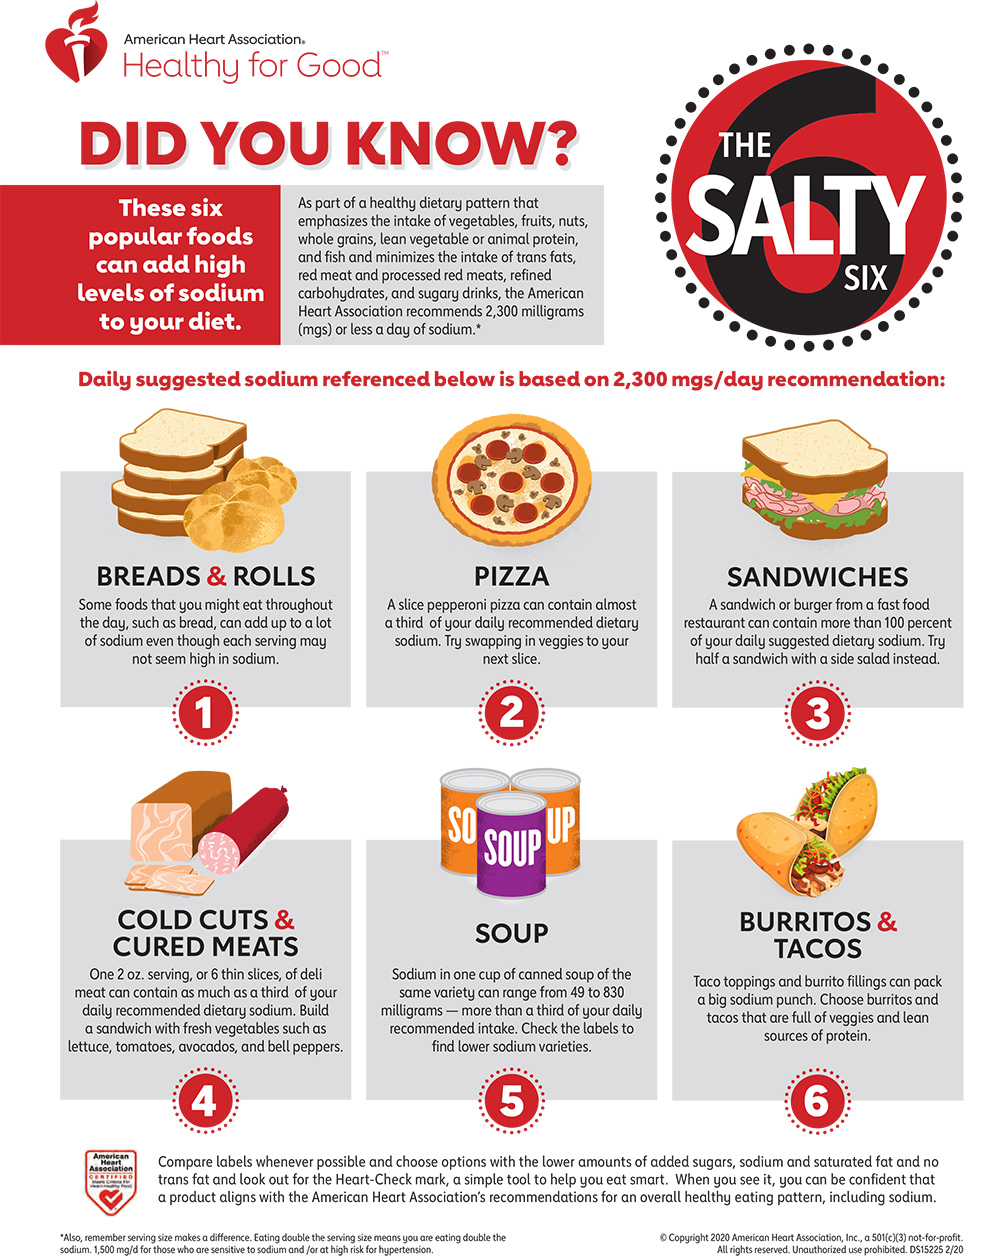 the-salty-6-foods-highest-in-sodium-infographic-american-heart